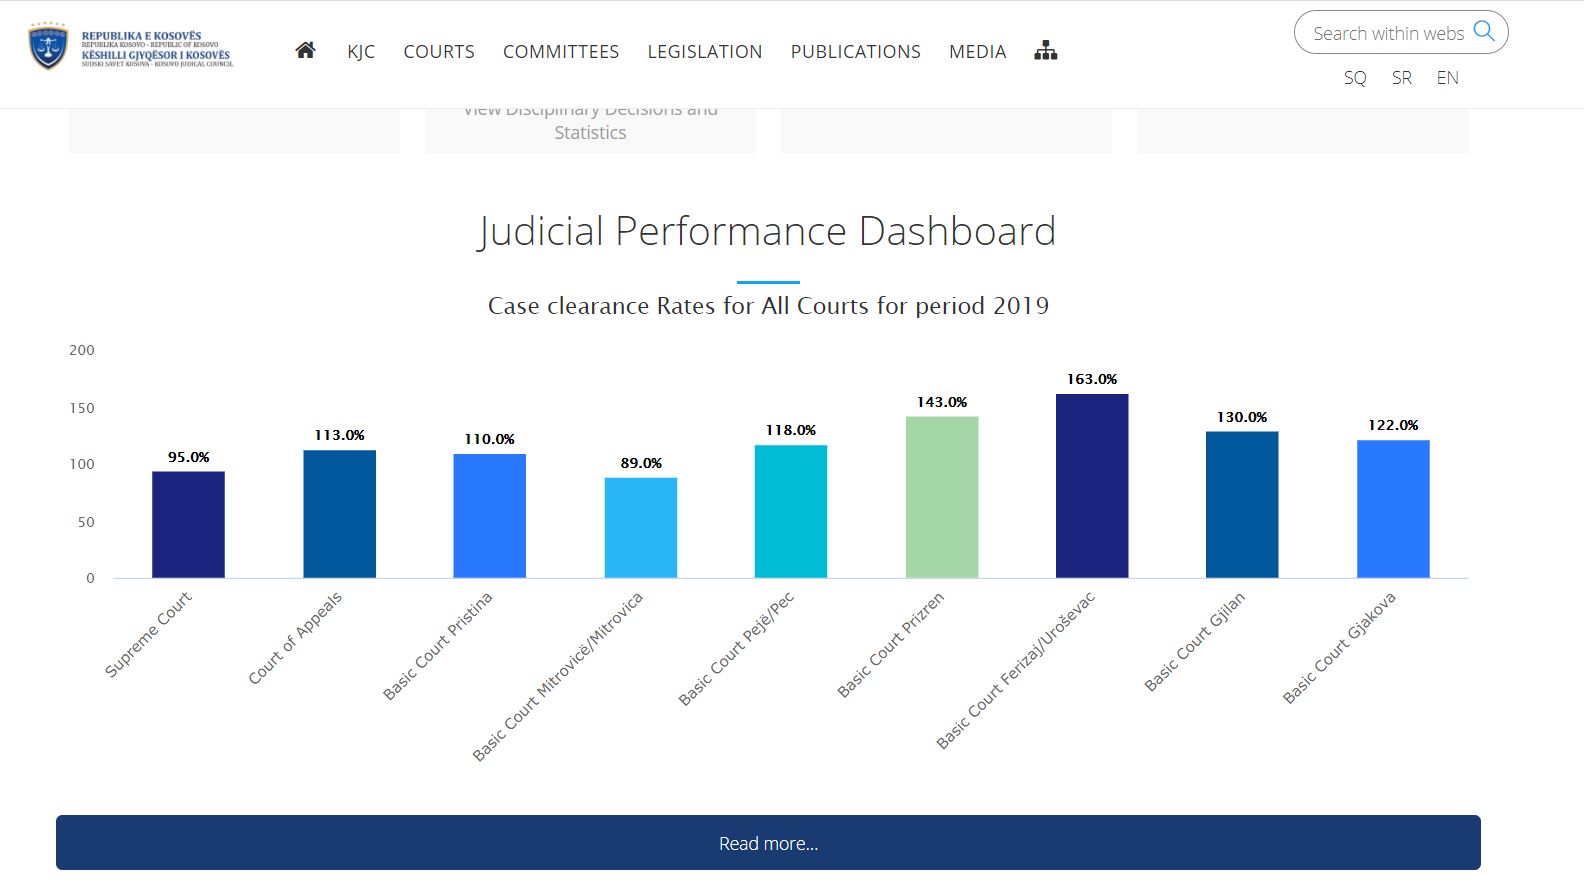 Judicial Performance Dashboard - An Important Milestone for Kosovo Courts